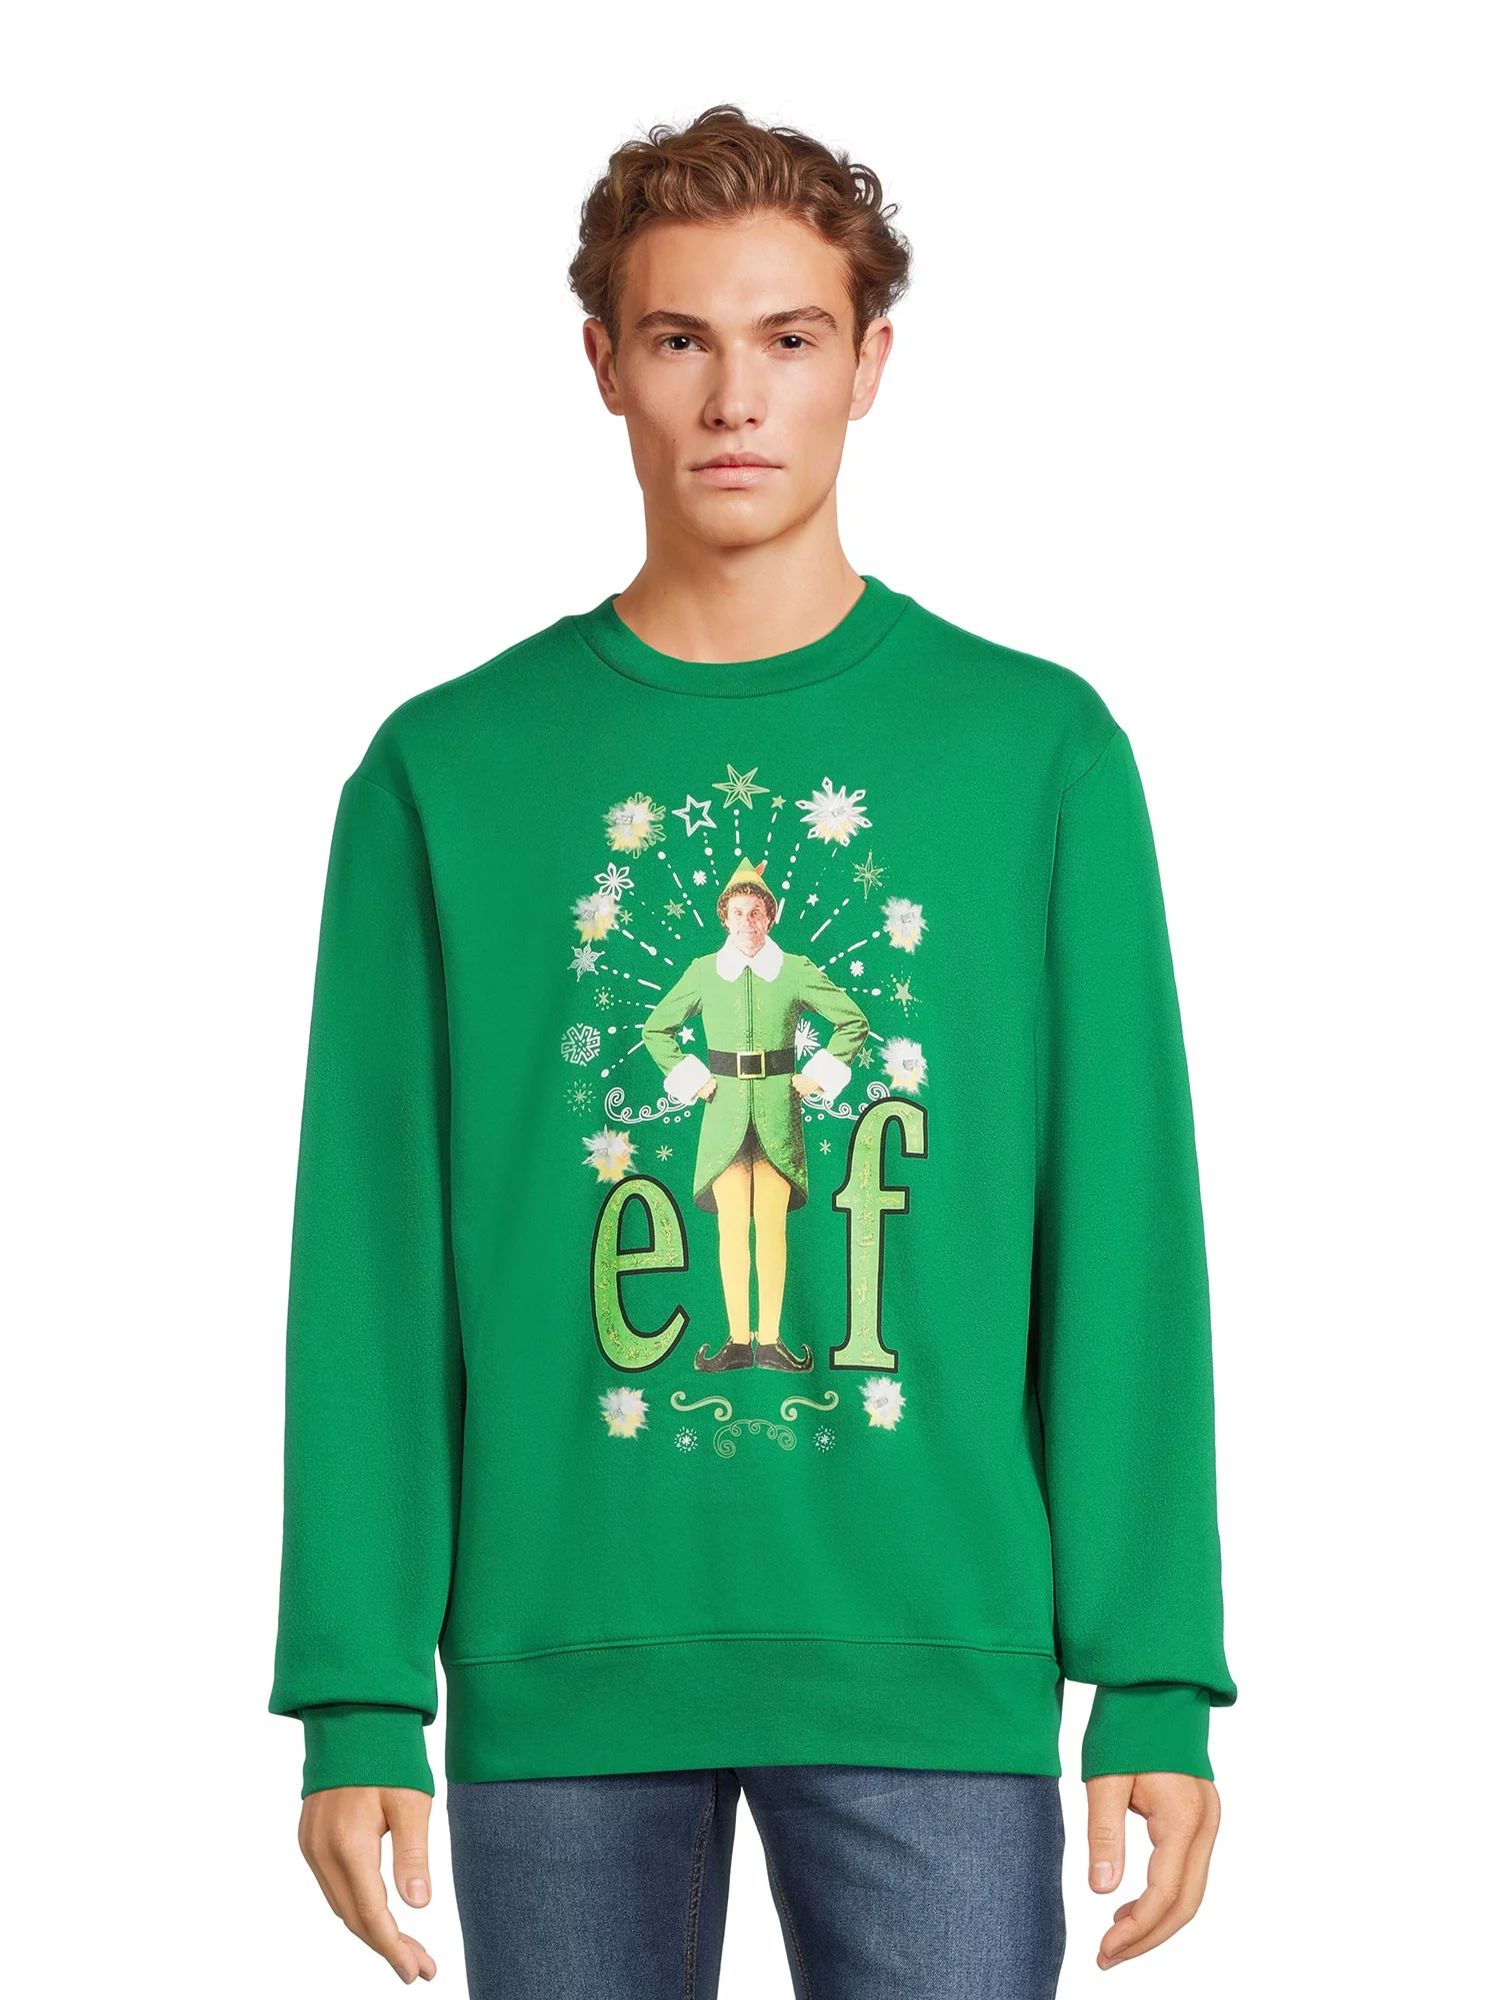 Elf Men's Light Up Christmas Sweater with Long Sleeves, Sizes S-3XL | Walmart (US)